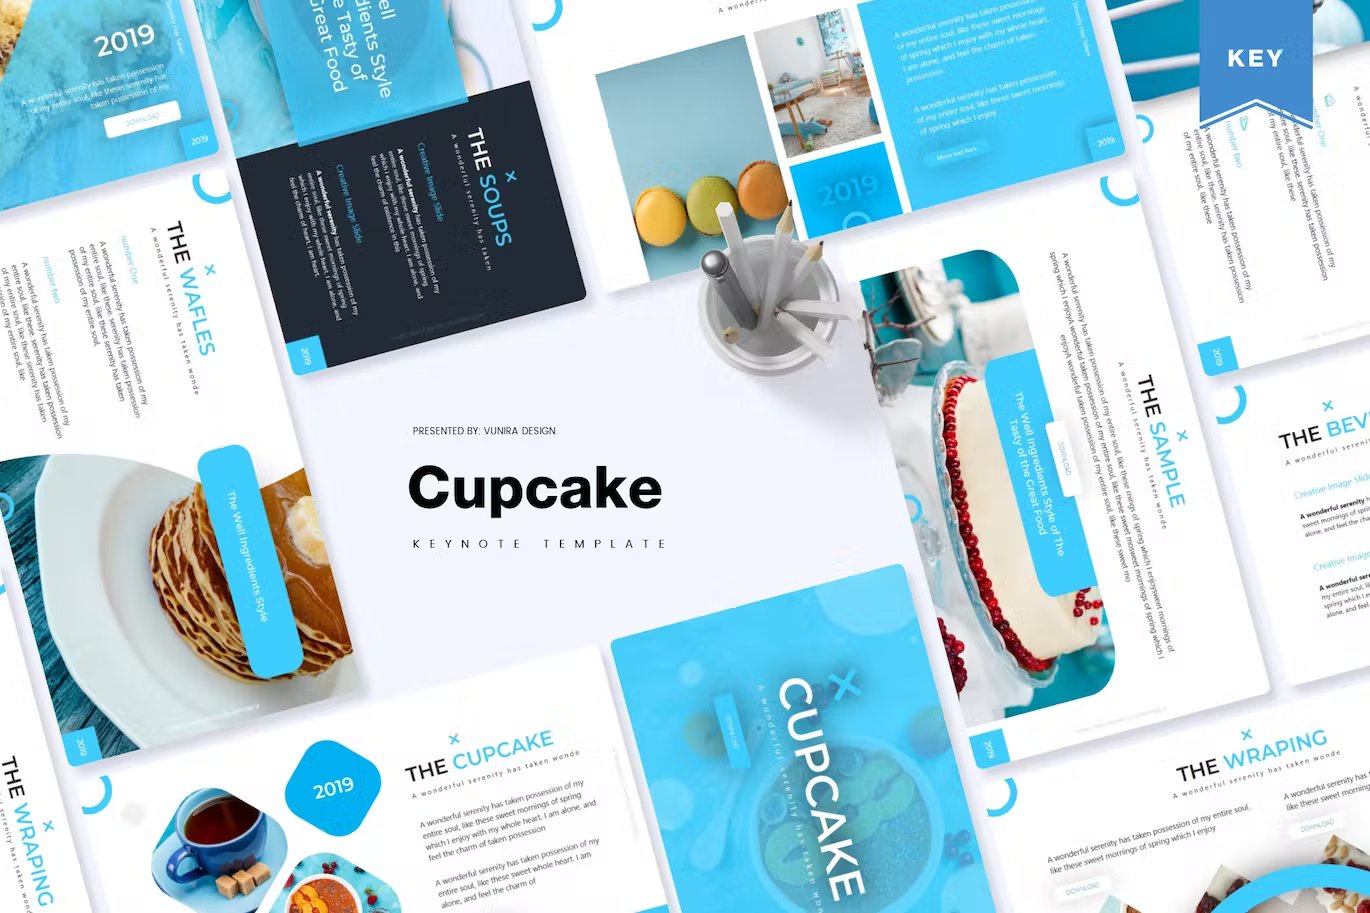 Black lettering "Cupcake Keynote Template" and different cupcake keynote templates in blue, white, dark blue and black on a white background.